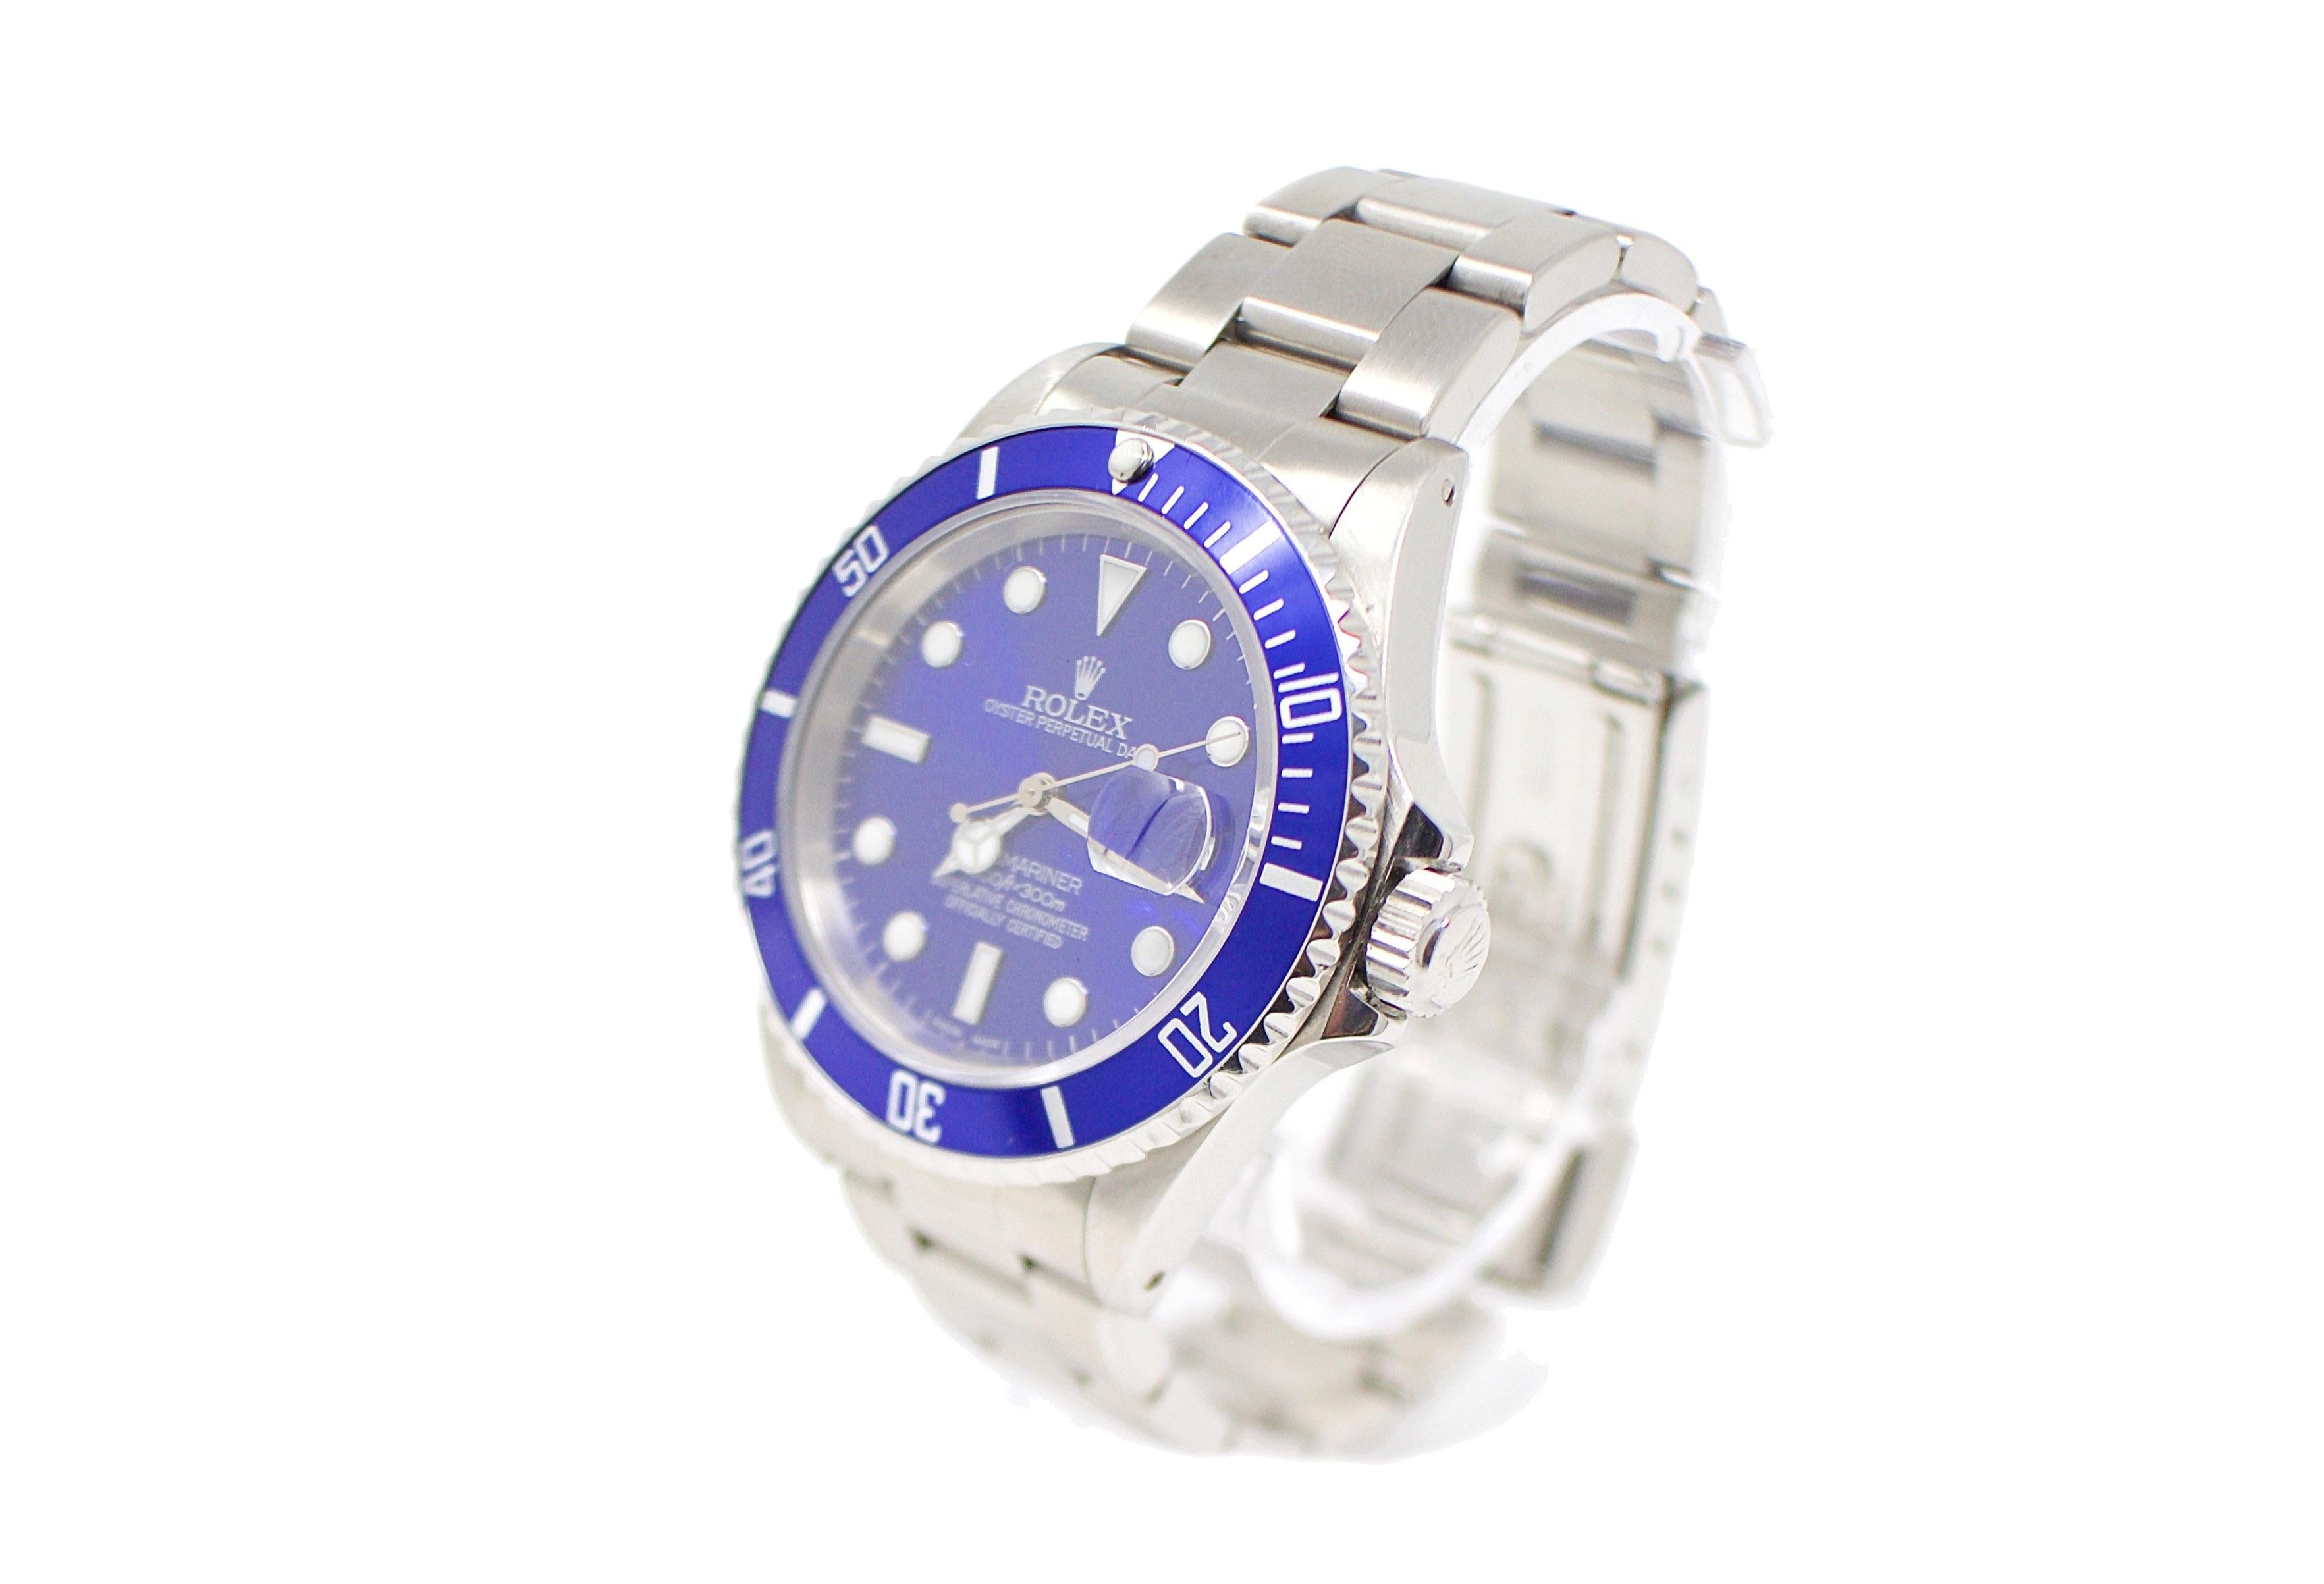 Brand - Rolex
Model - 16610 Submariner
Gender - Men's
Case Size - 40mm
Dial - Refinished Blue
Bezel - Rolex Steel ./Custom Blue 
Crystal - Saphire 
Movement - Automatic Rolex CAL.3135
Band - Steel Oyster 
Wrist Size - 8 Inches

Two Year In House